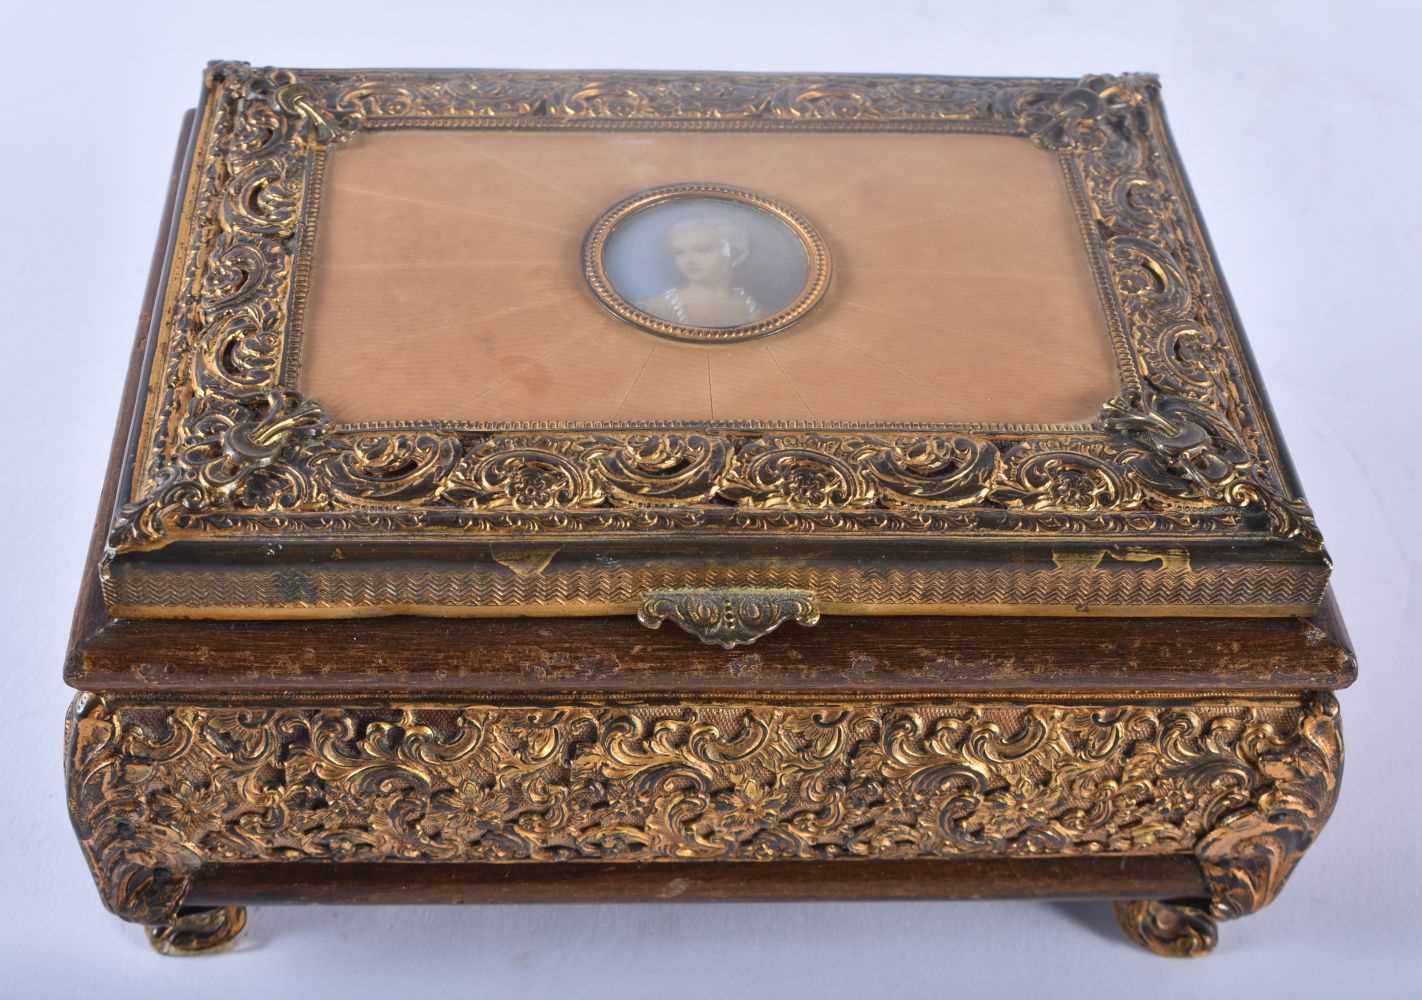 A LARGE EARLY VICTORIAN MAHOGANY DOME TOP BOX together with a French gilt metal repousse casket, - Image 5 of 7